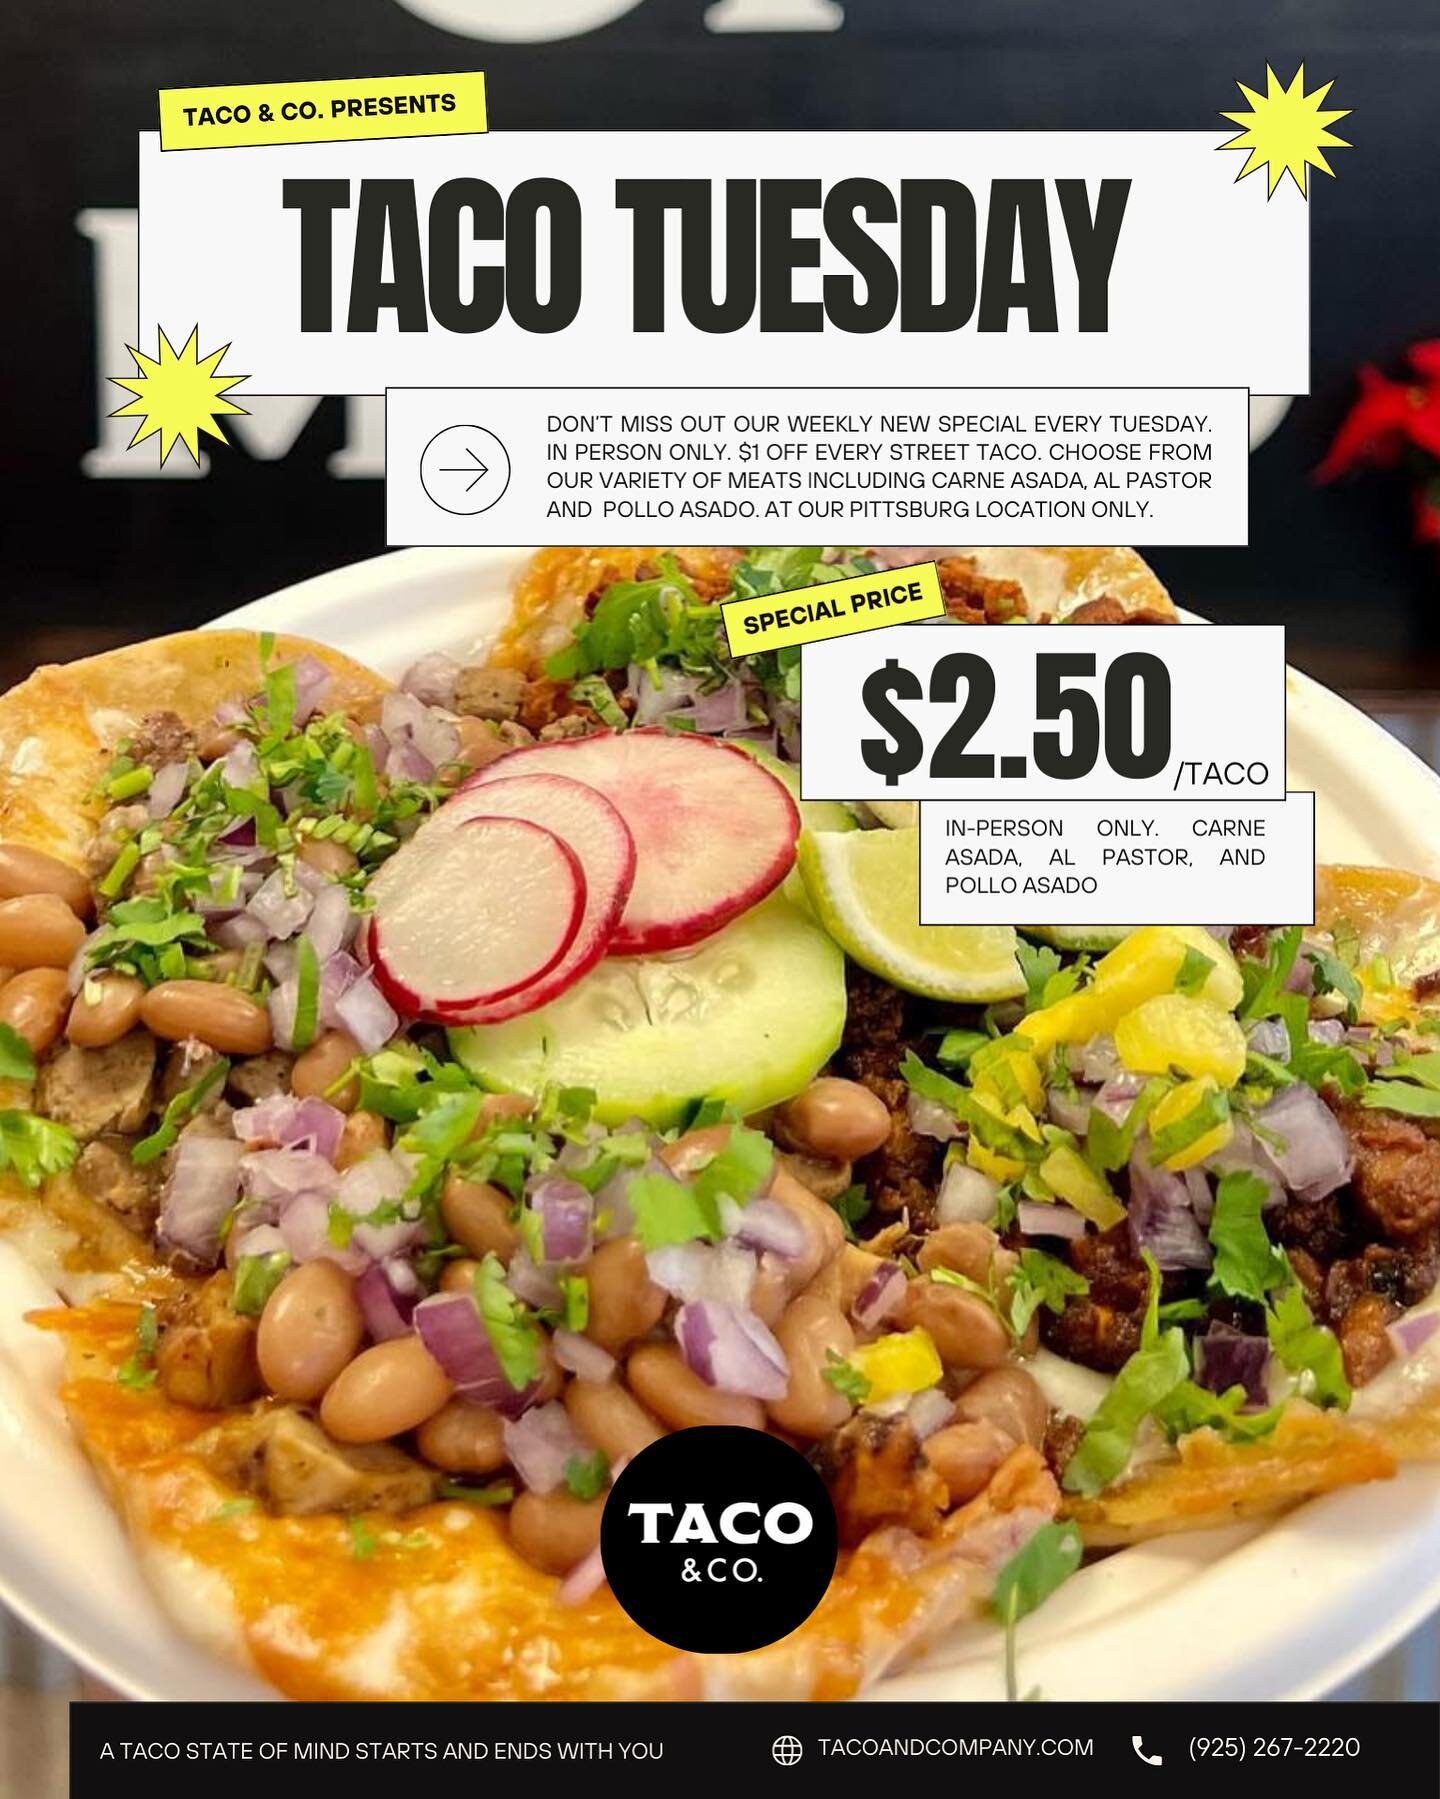 💥 TACO &amp; CO. TUESDAY IS HERE 💥

Taco Tuesdays just got better! Don&rsquo;t miss this weekly special every Tuesday. $1 off every street taco. Where tradition and quality meet. 🌮

*In-Person Only*

#TacoAndCompany #TacoStateOfMind #TacoTuesday #